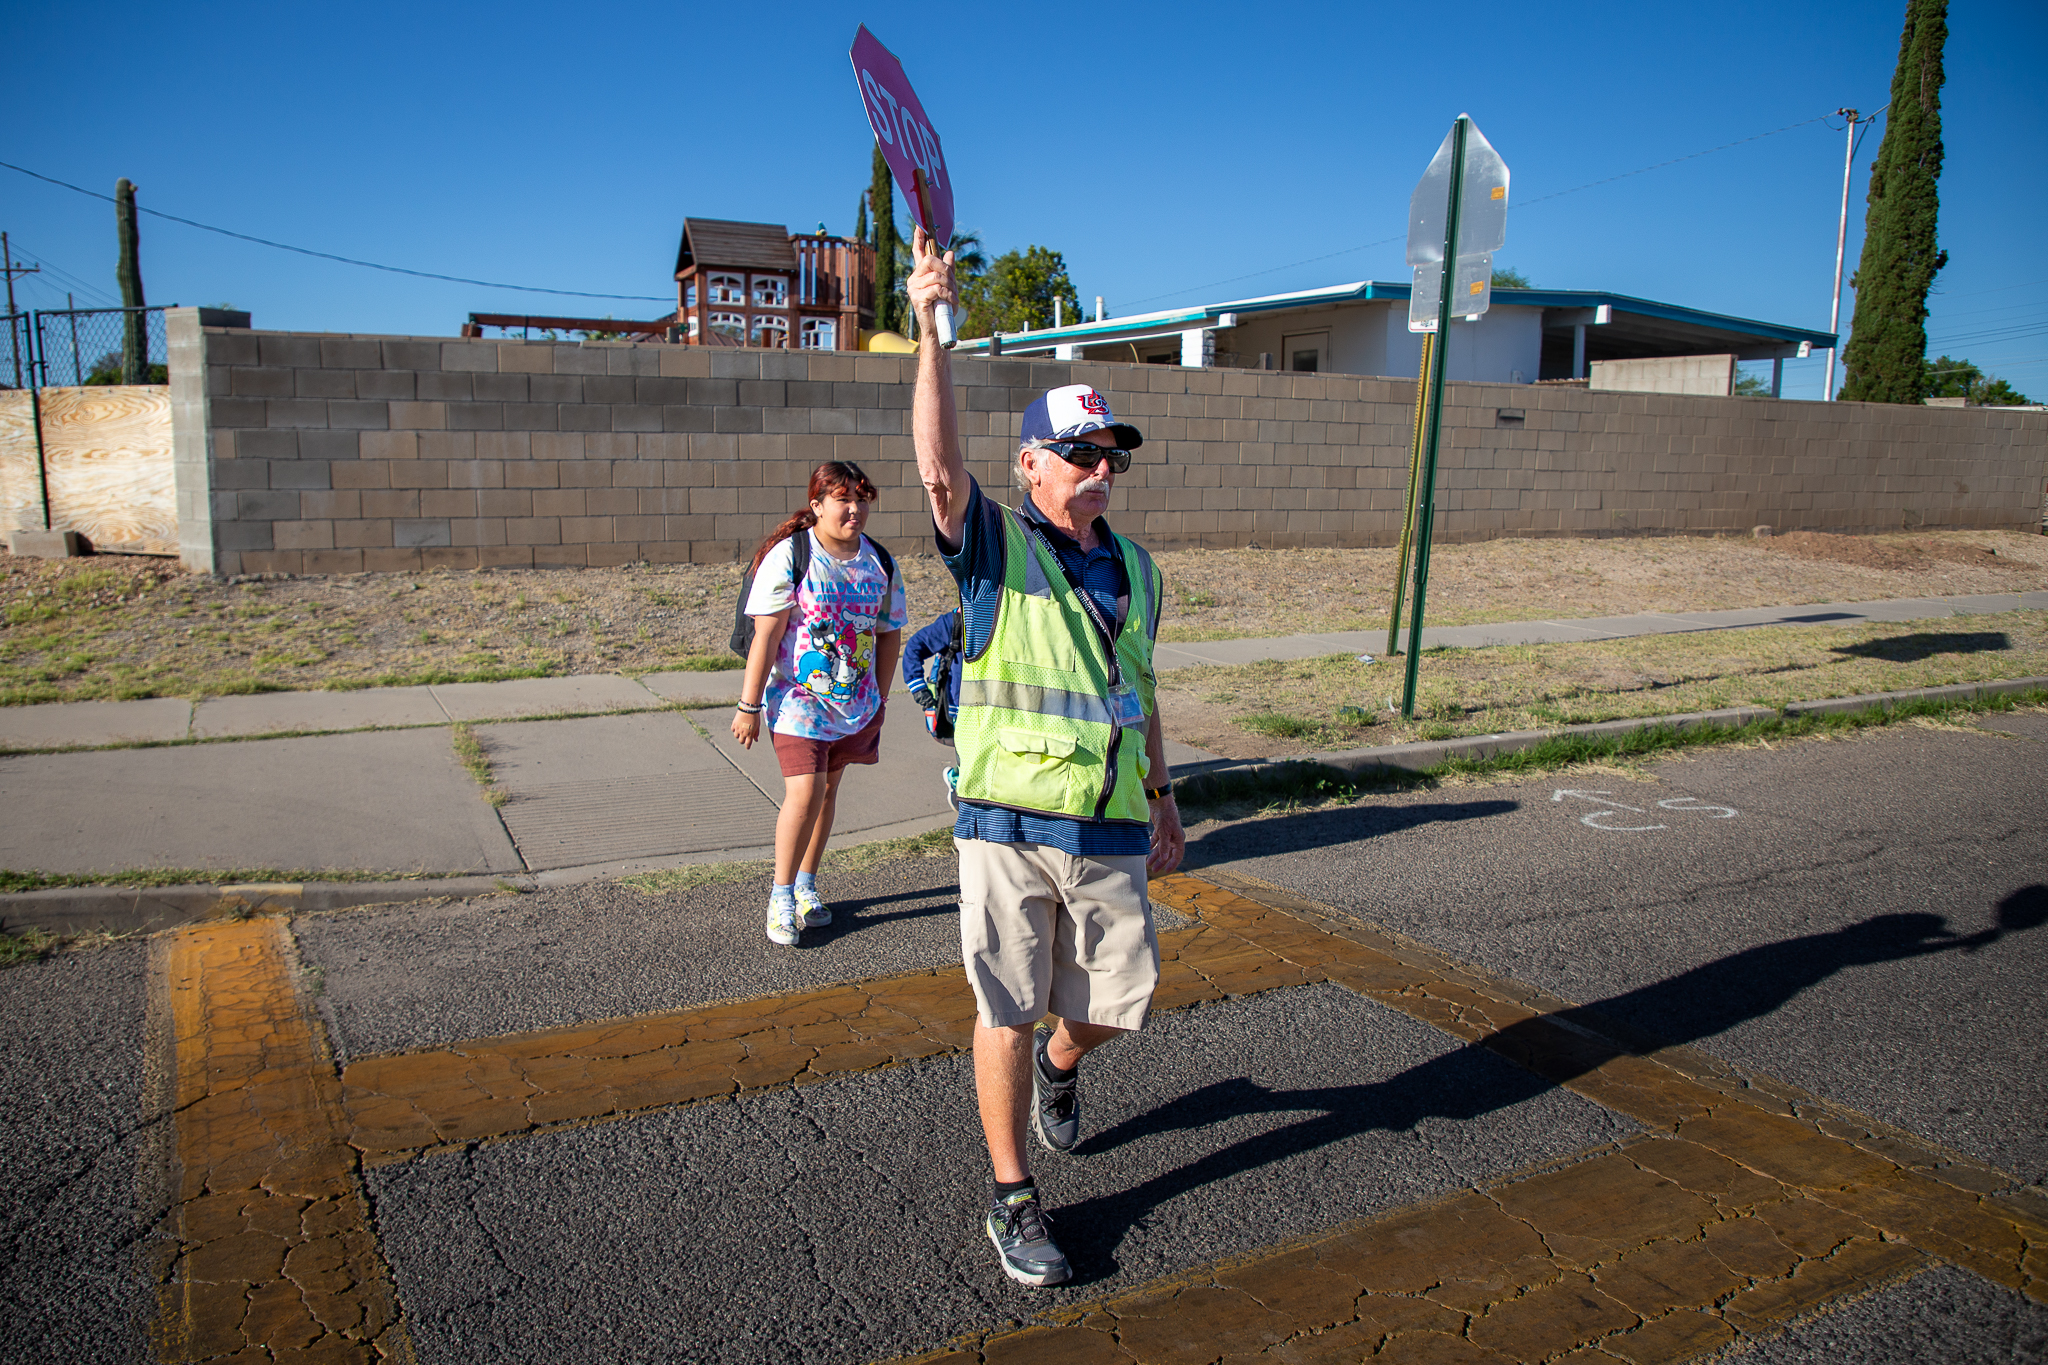 Crossing Guard Steve walking and raising the "stop" sign for student to cross the street